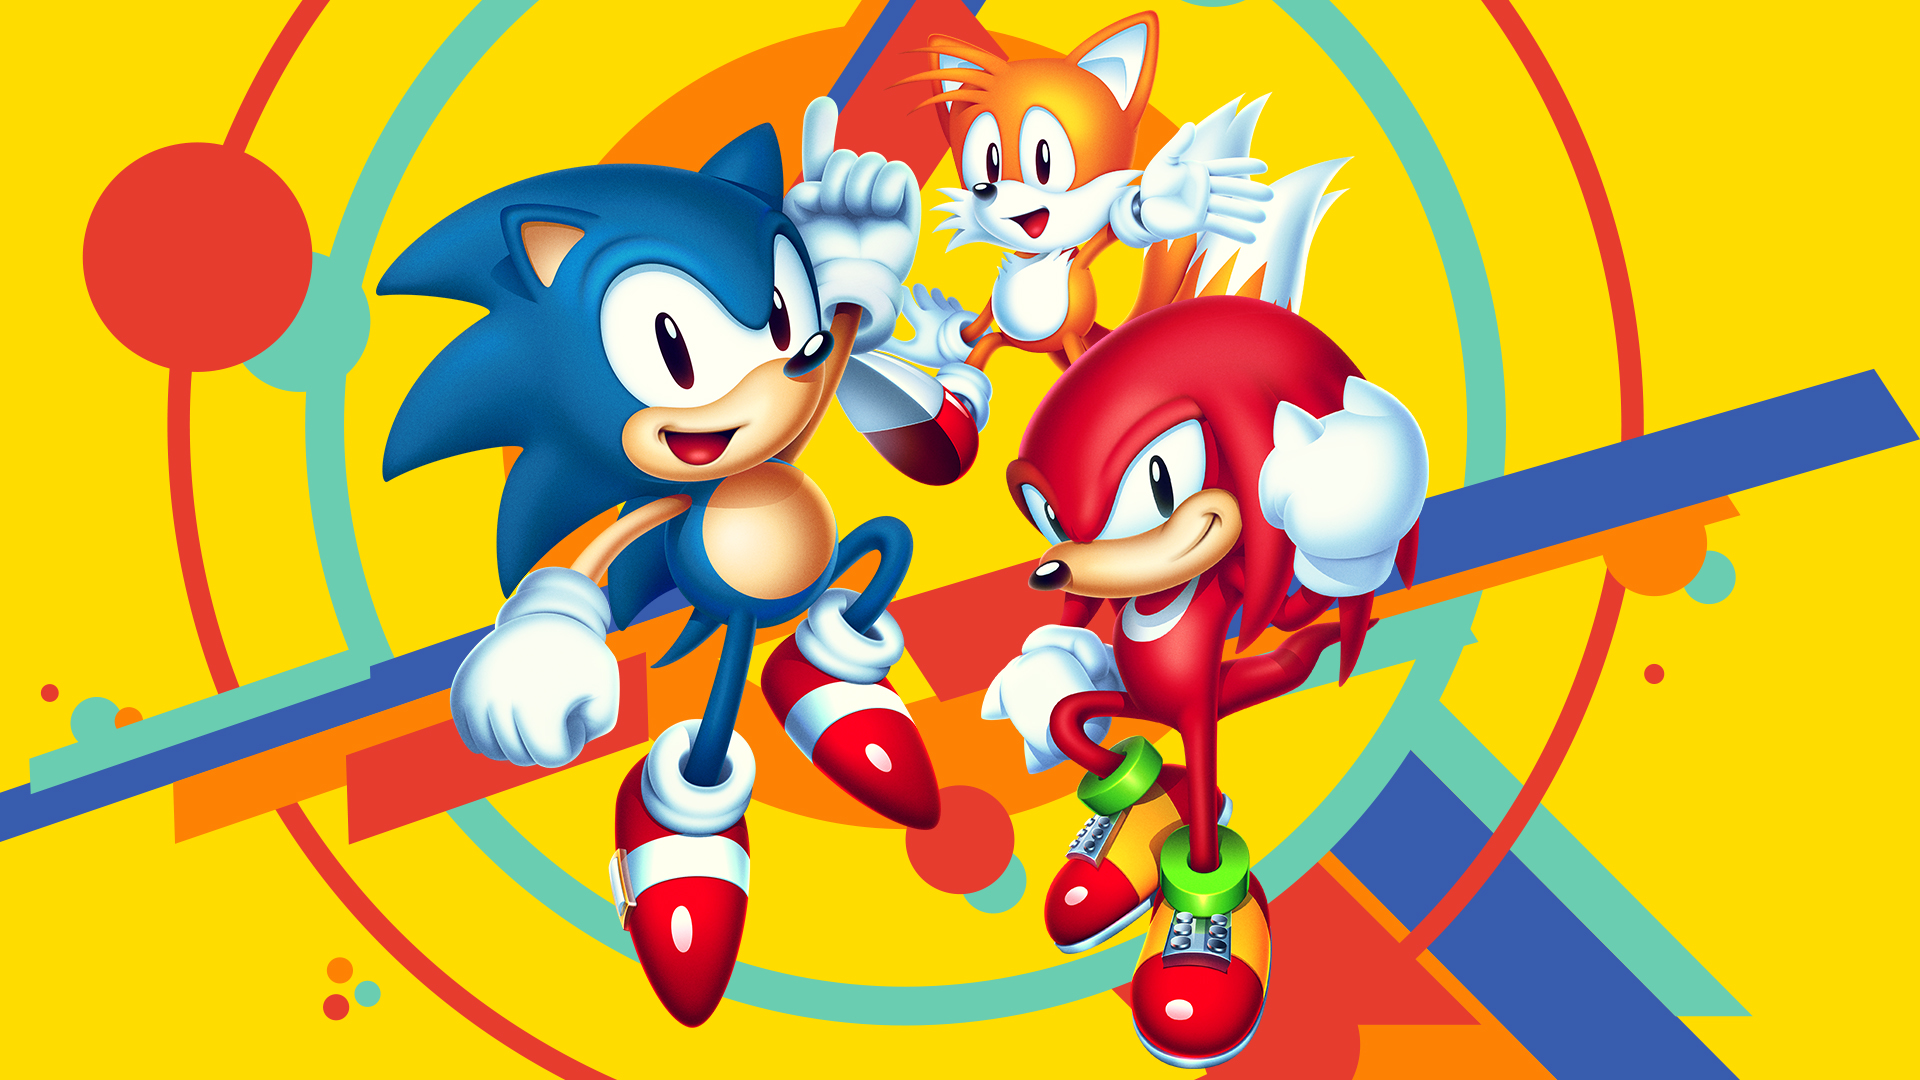 Classic Knuckles Classic Sonic Classic Tails Knuckles The Echidna Miles Quot Tails Quot Prower Sonic 1920x1080